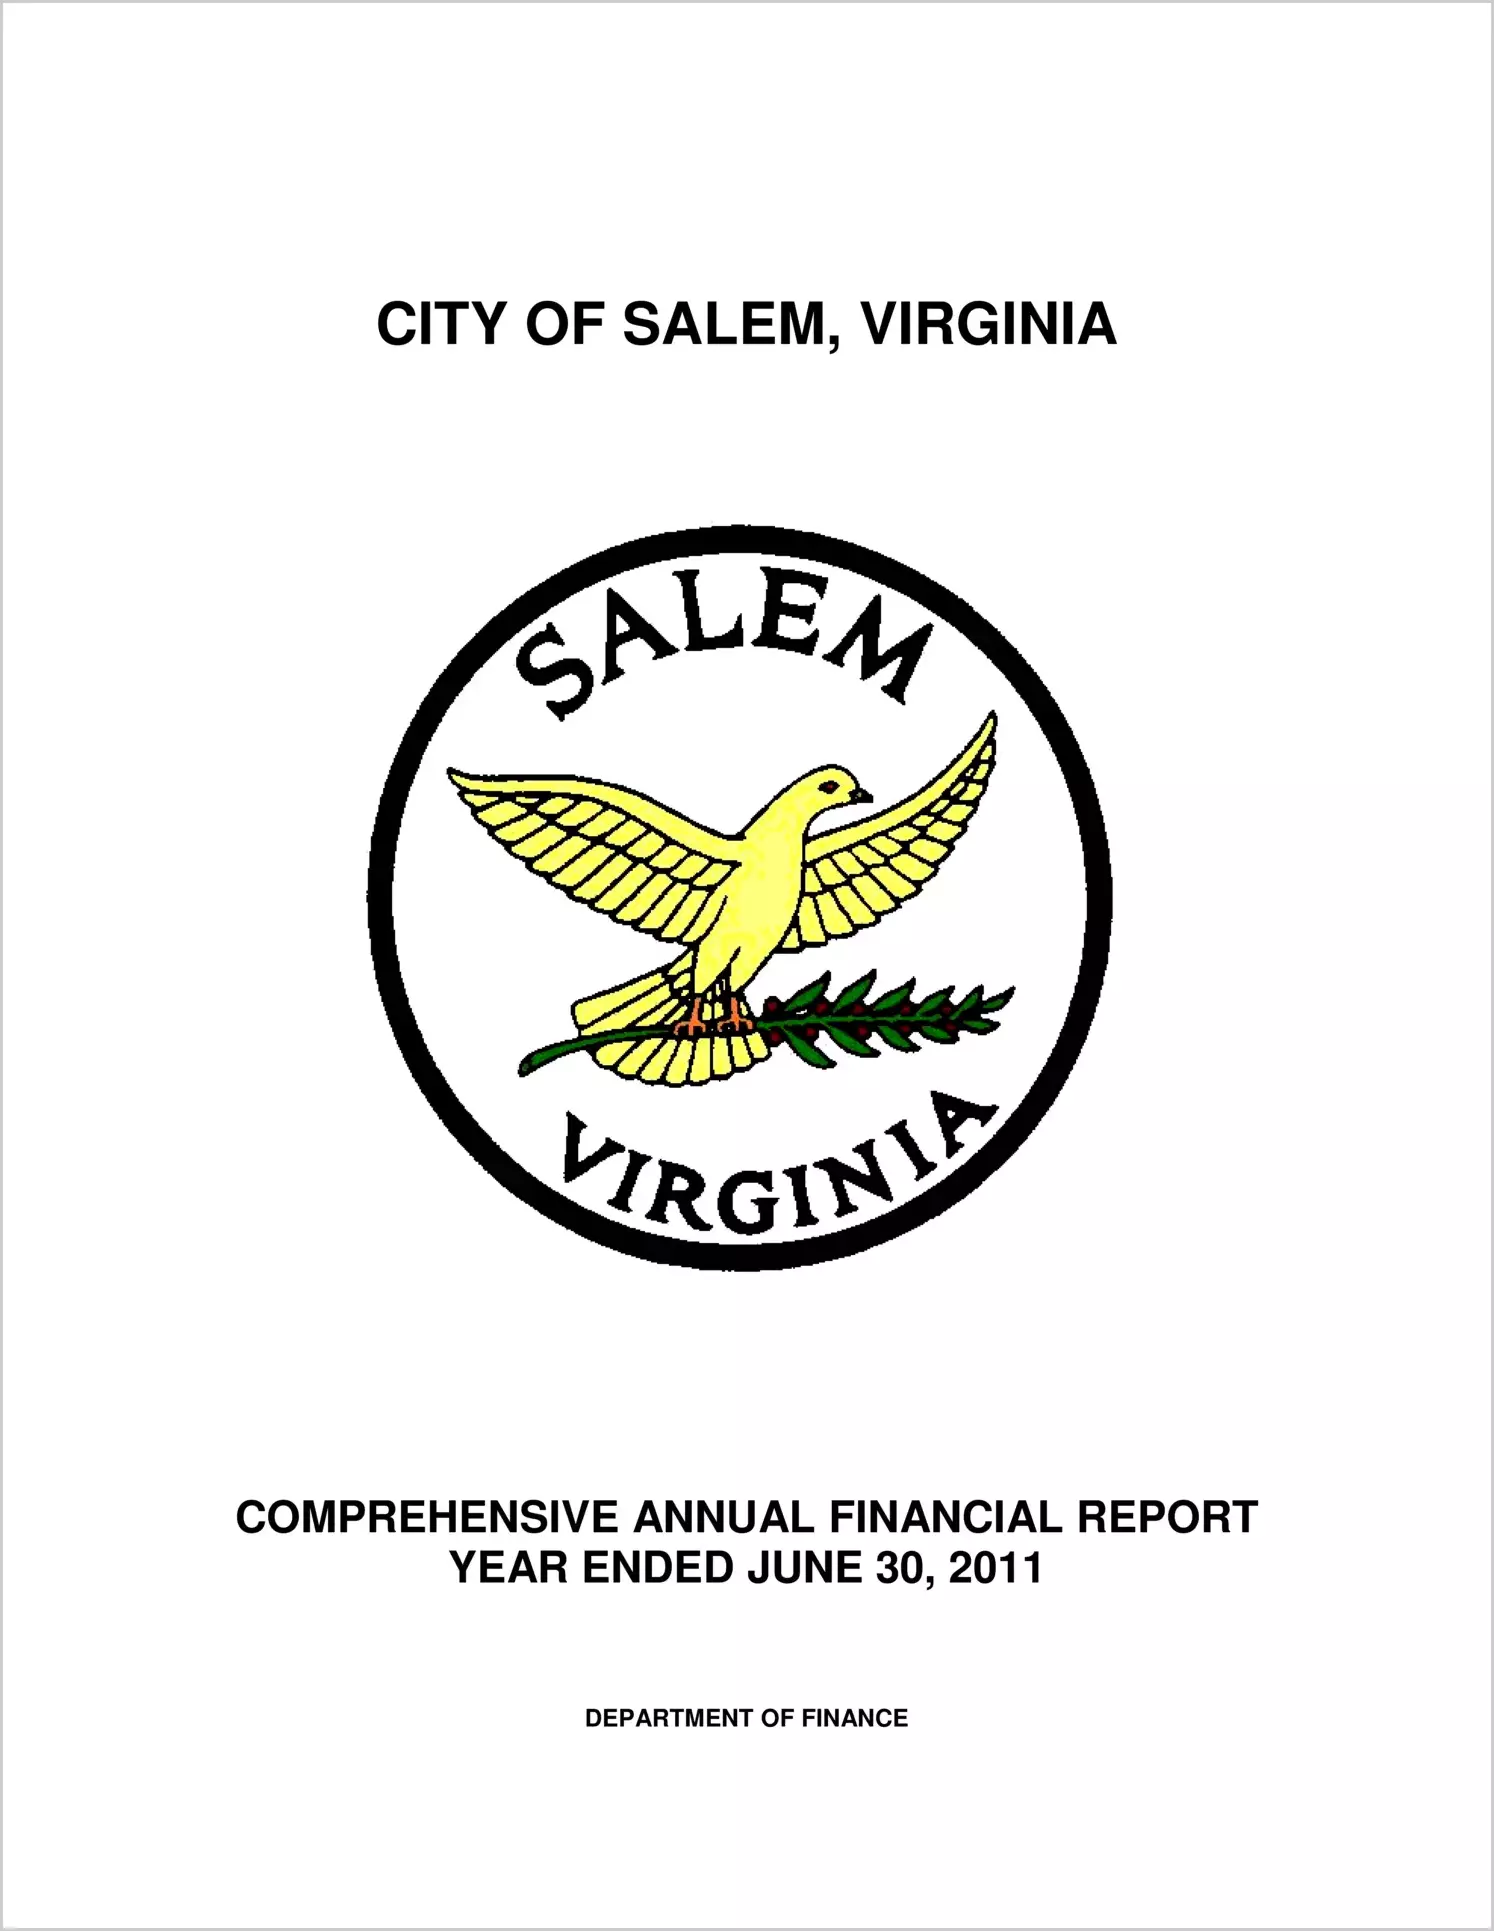 2011 Annual Financial Report for City of Salem